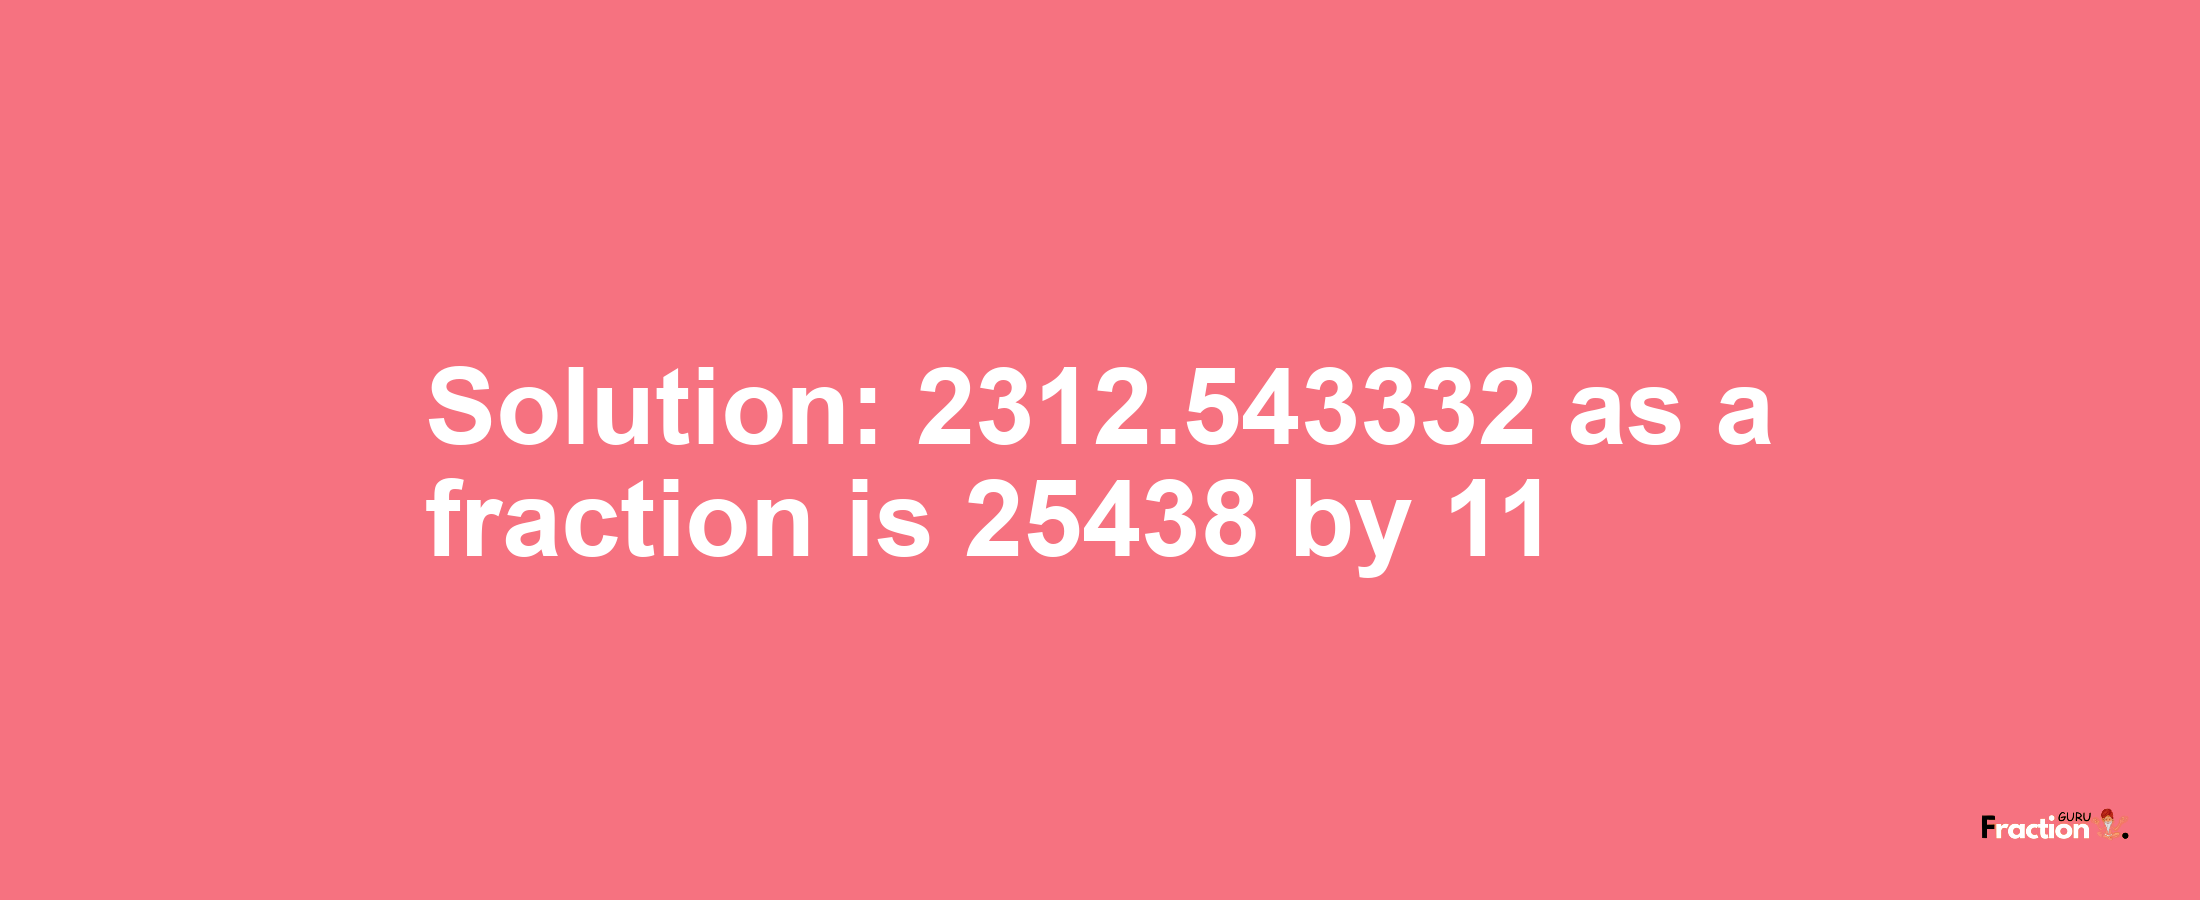 Solution:2312.543332 as a fraction is 25438/11